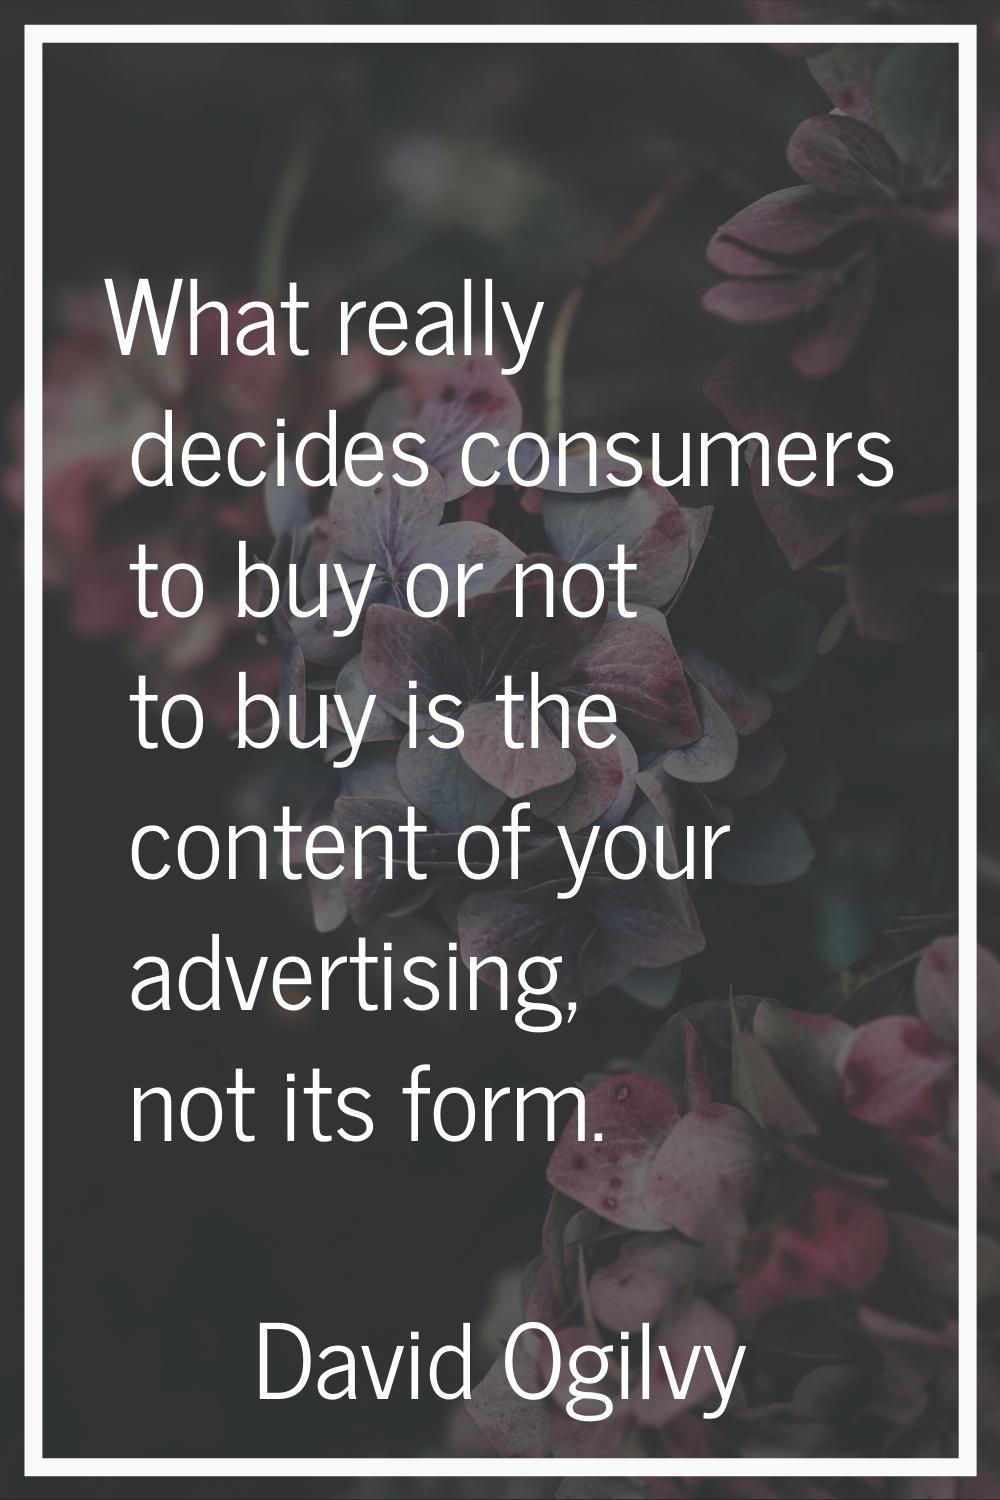 What really decides consumers to buy or not to buy is the content of your advertising, not its form